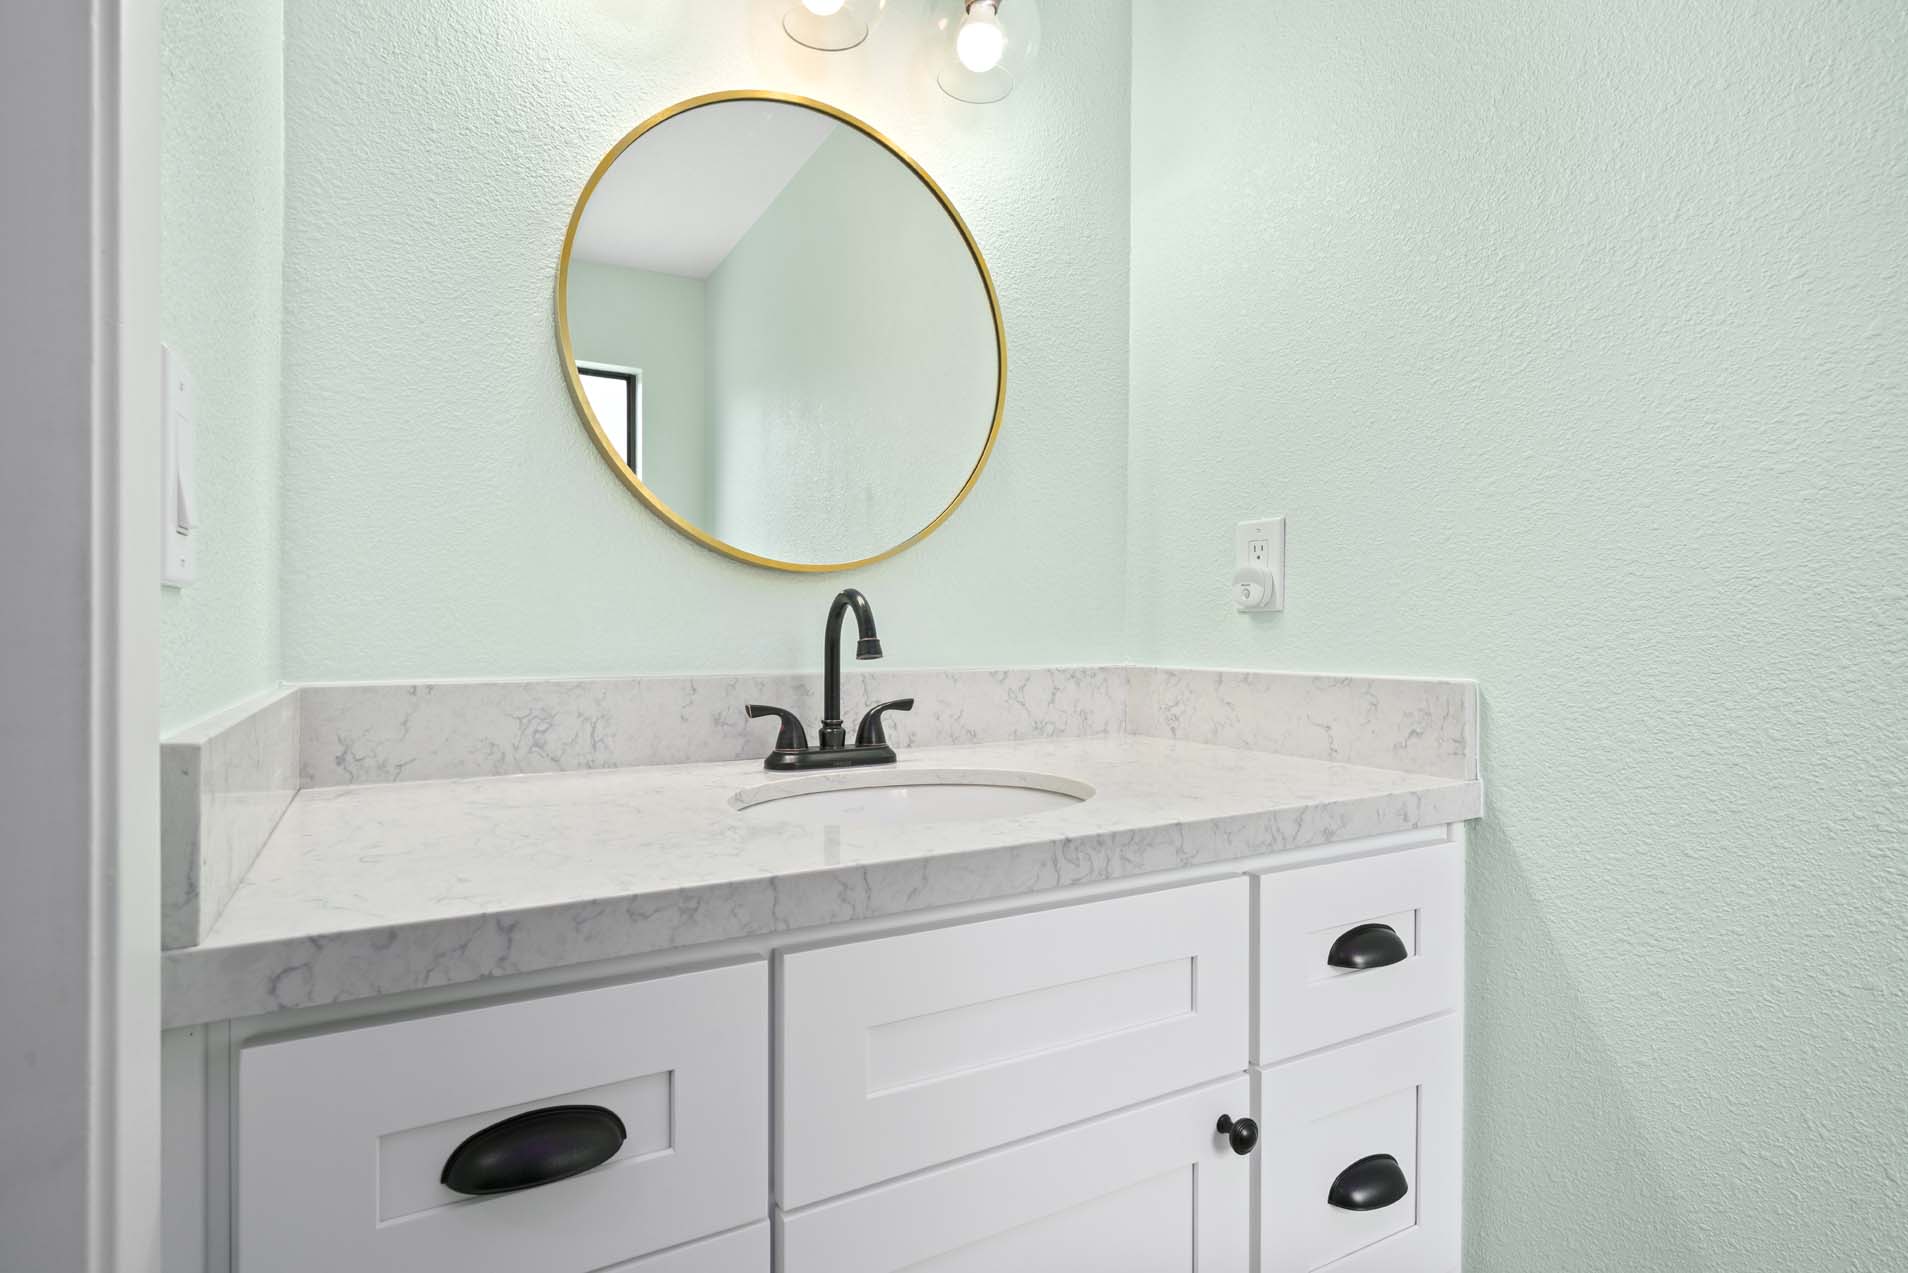 Bathroom remodeling in Rocklin, California 95677 by Luxehome Construction Inc.